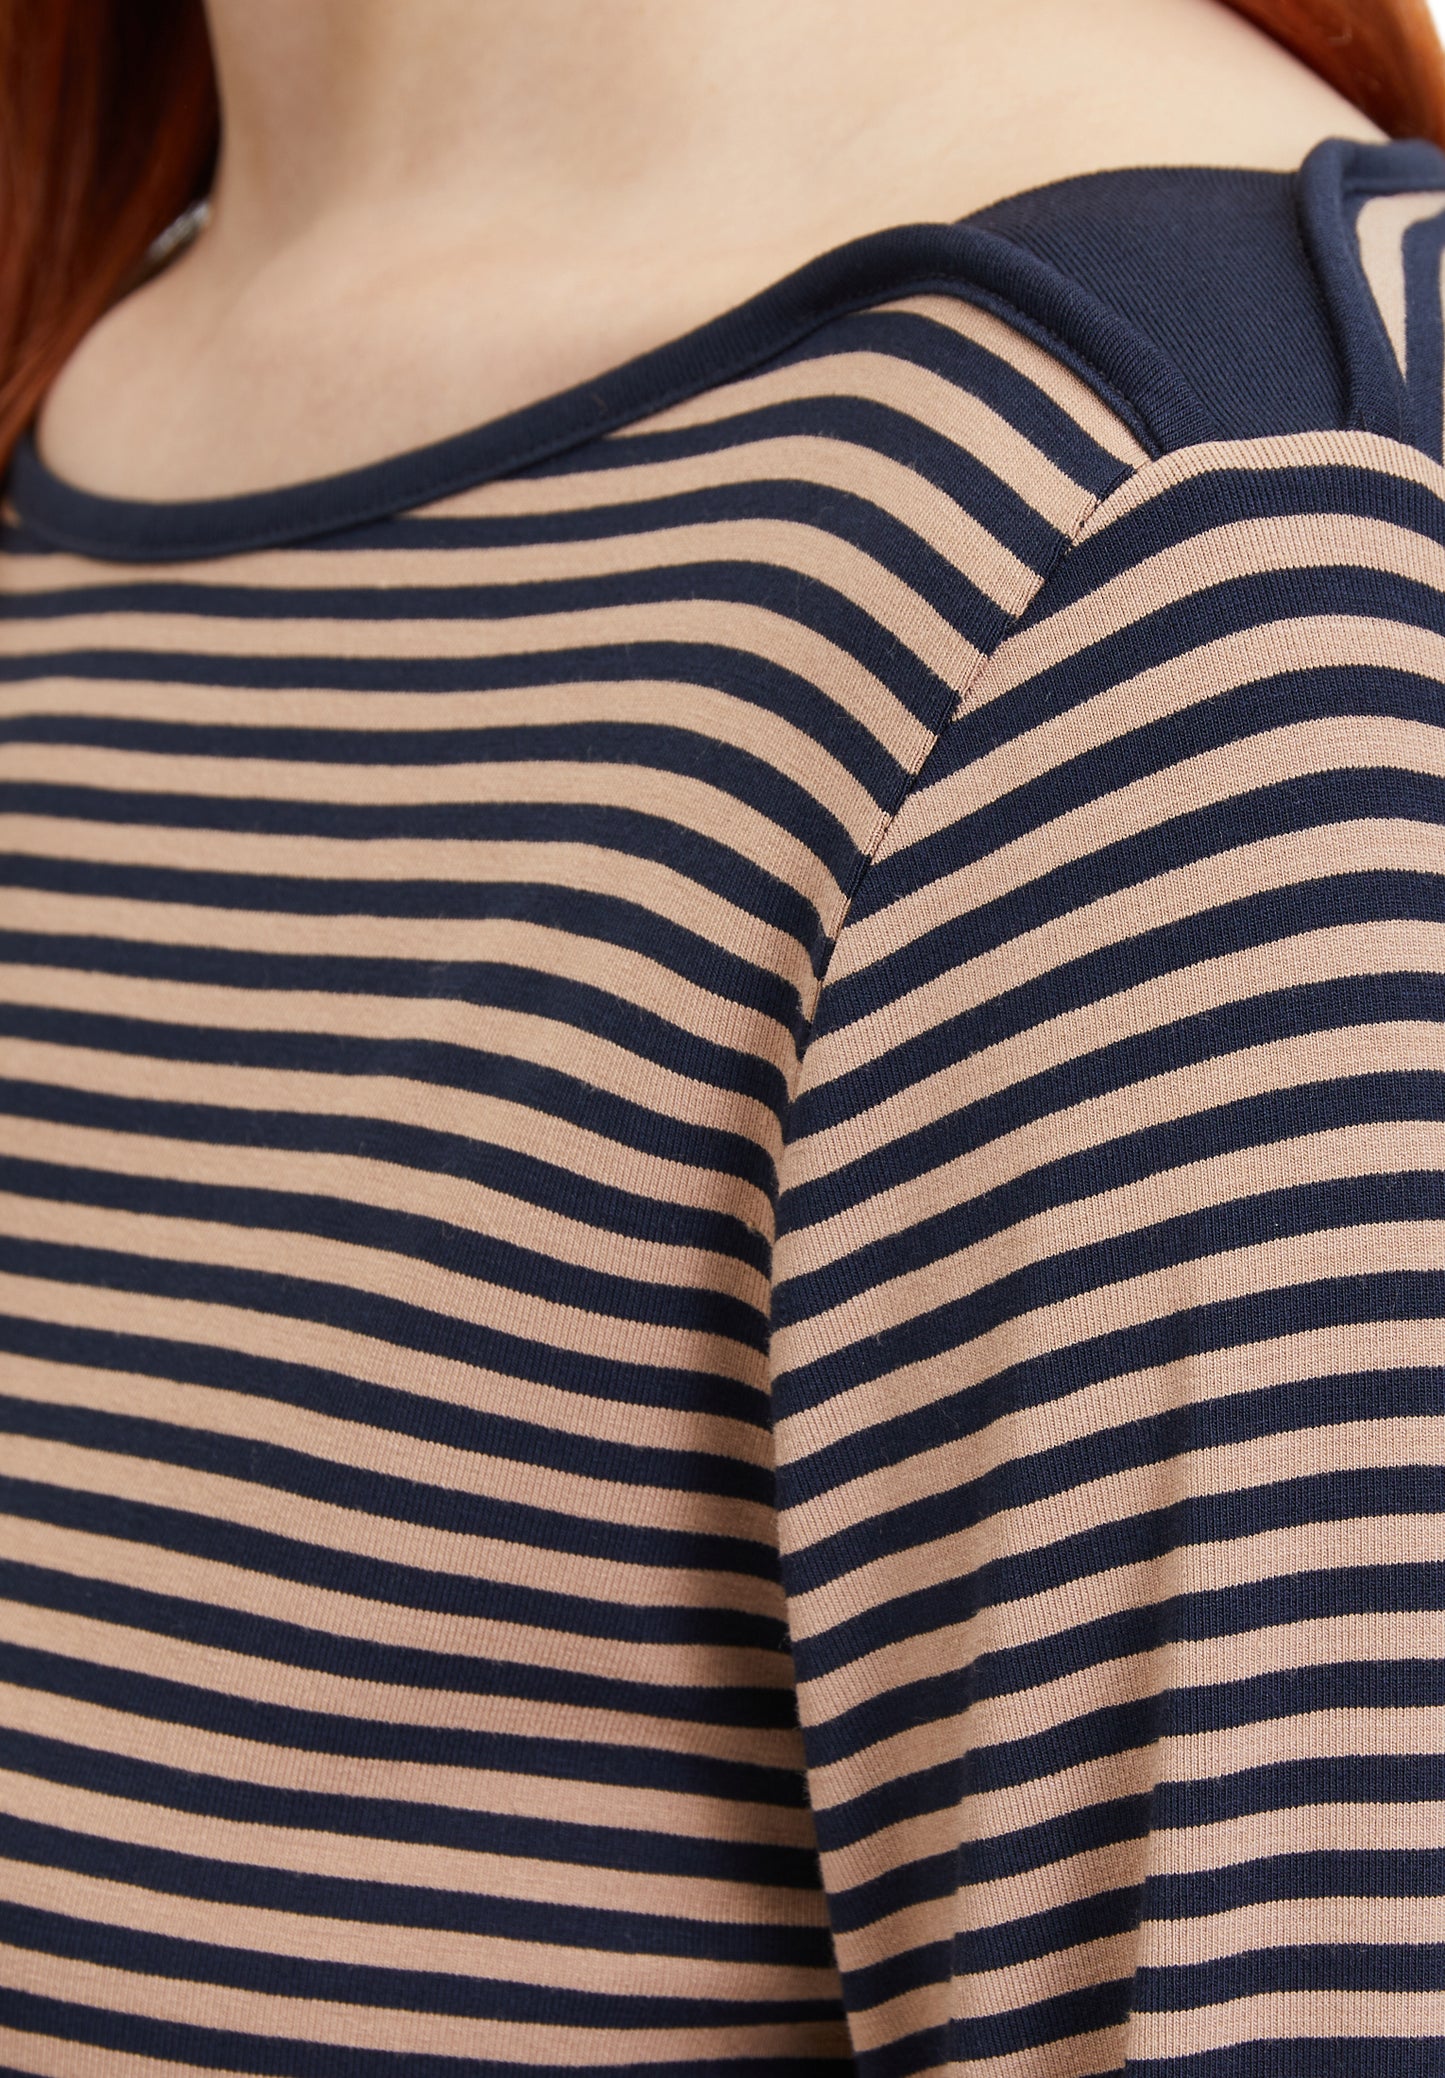 Betty Barclay Striped Top